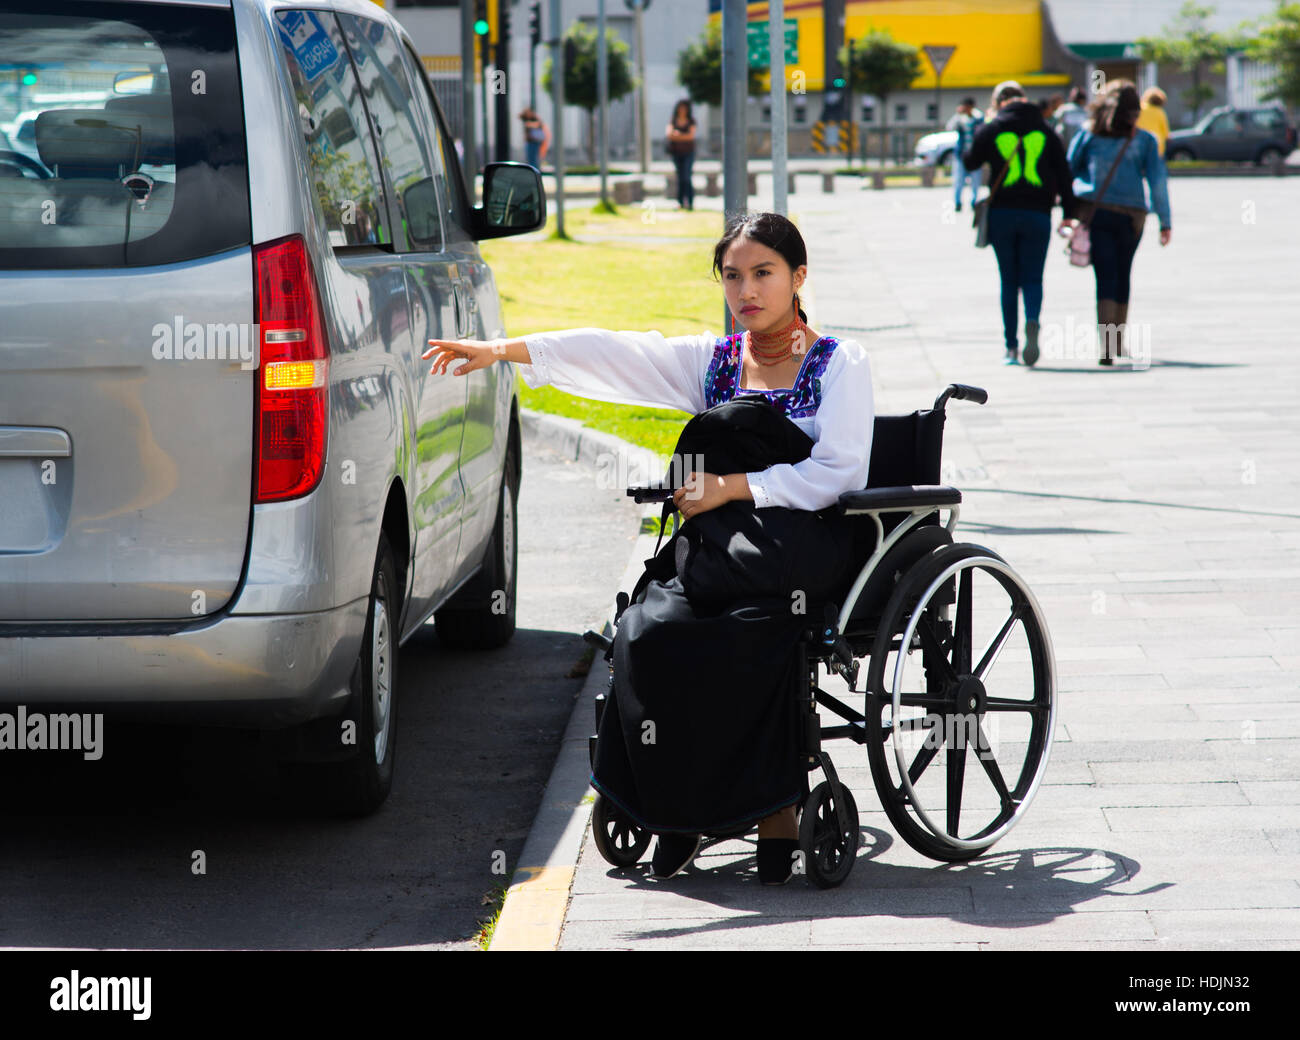 Young brunette woman sitting in wheelchair smiling with positive attitude, holding out arm looking for taxi, outdoors environment, physical recovery concept Stock Photo